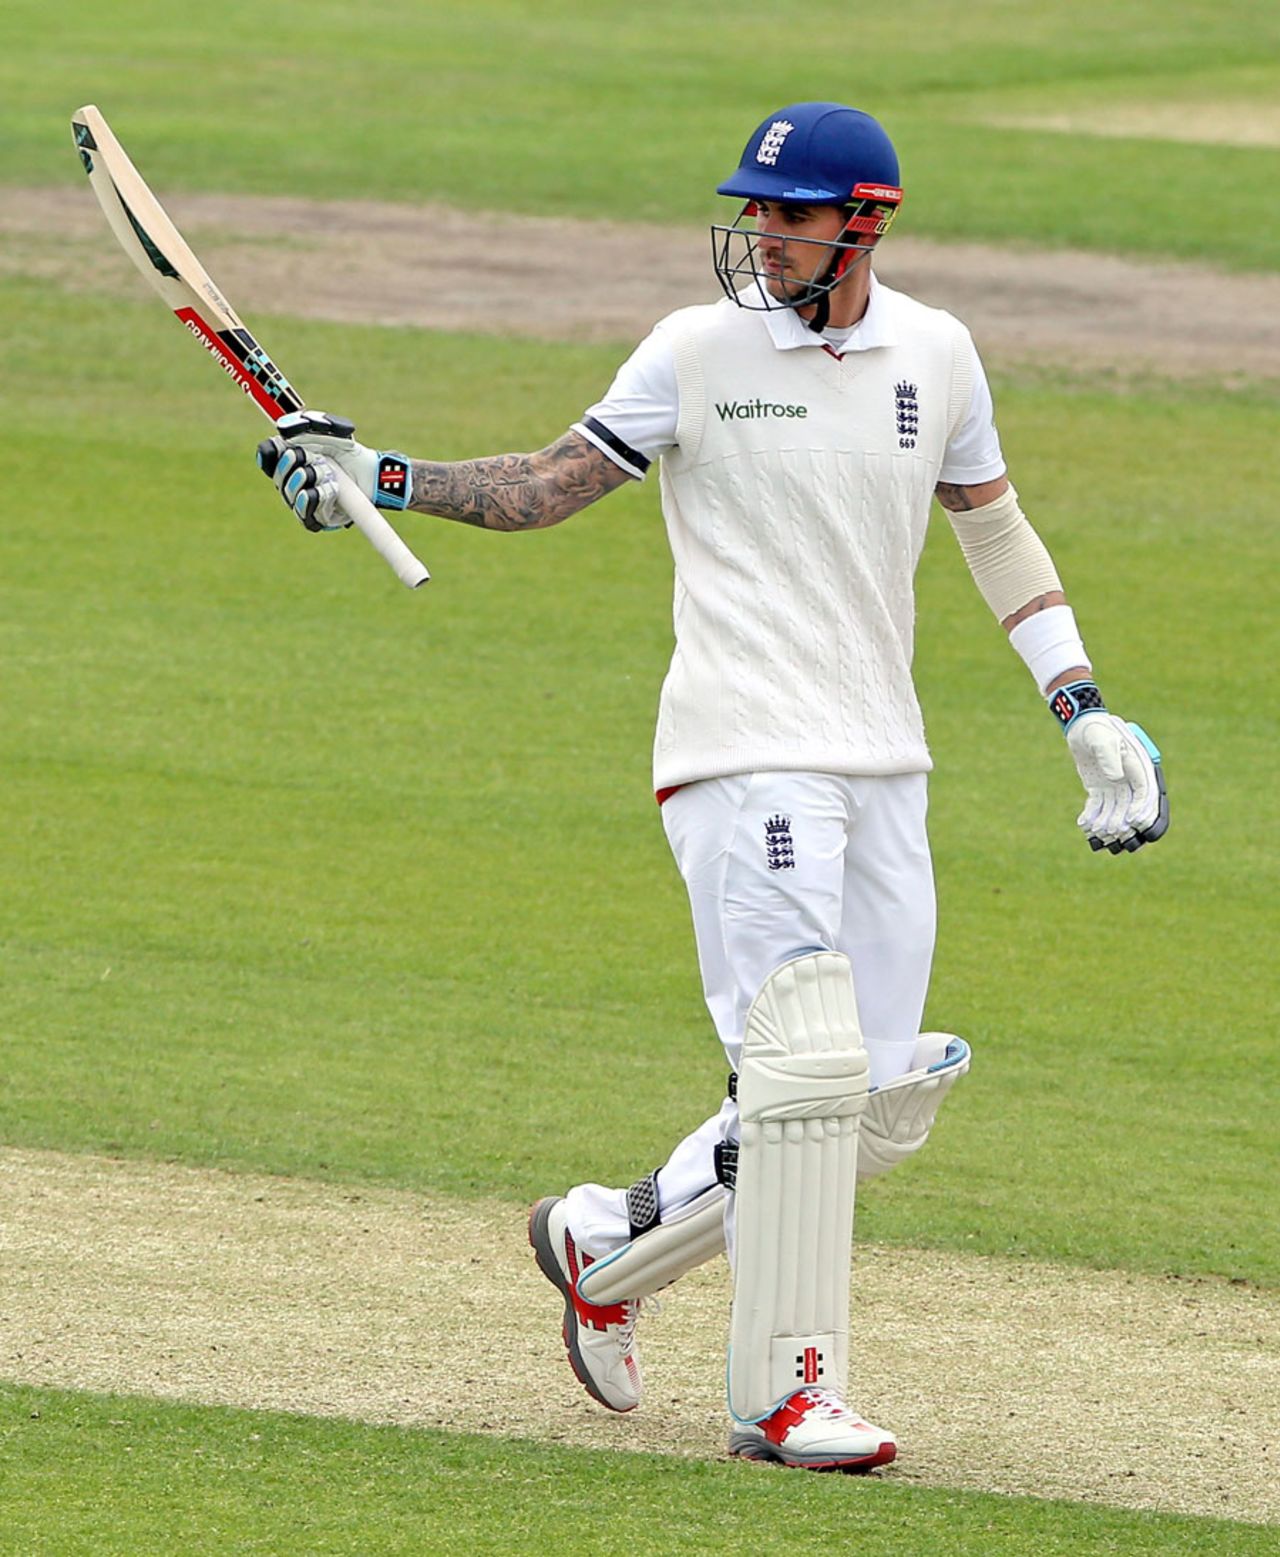 Alex Hales reached his second Test fifty, England v Sri Lanka, 1st Test, Headingley, 1st day, May 19, 2016